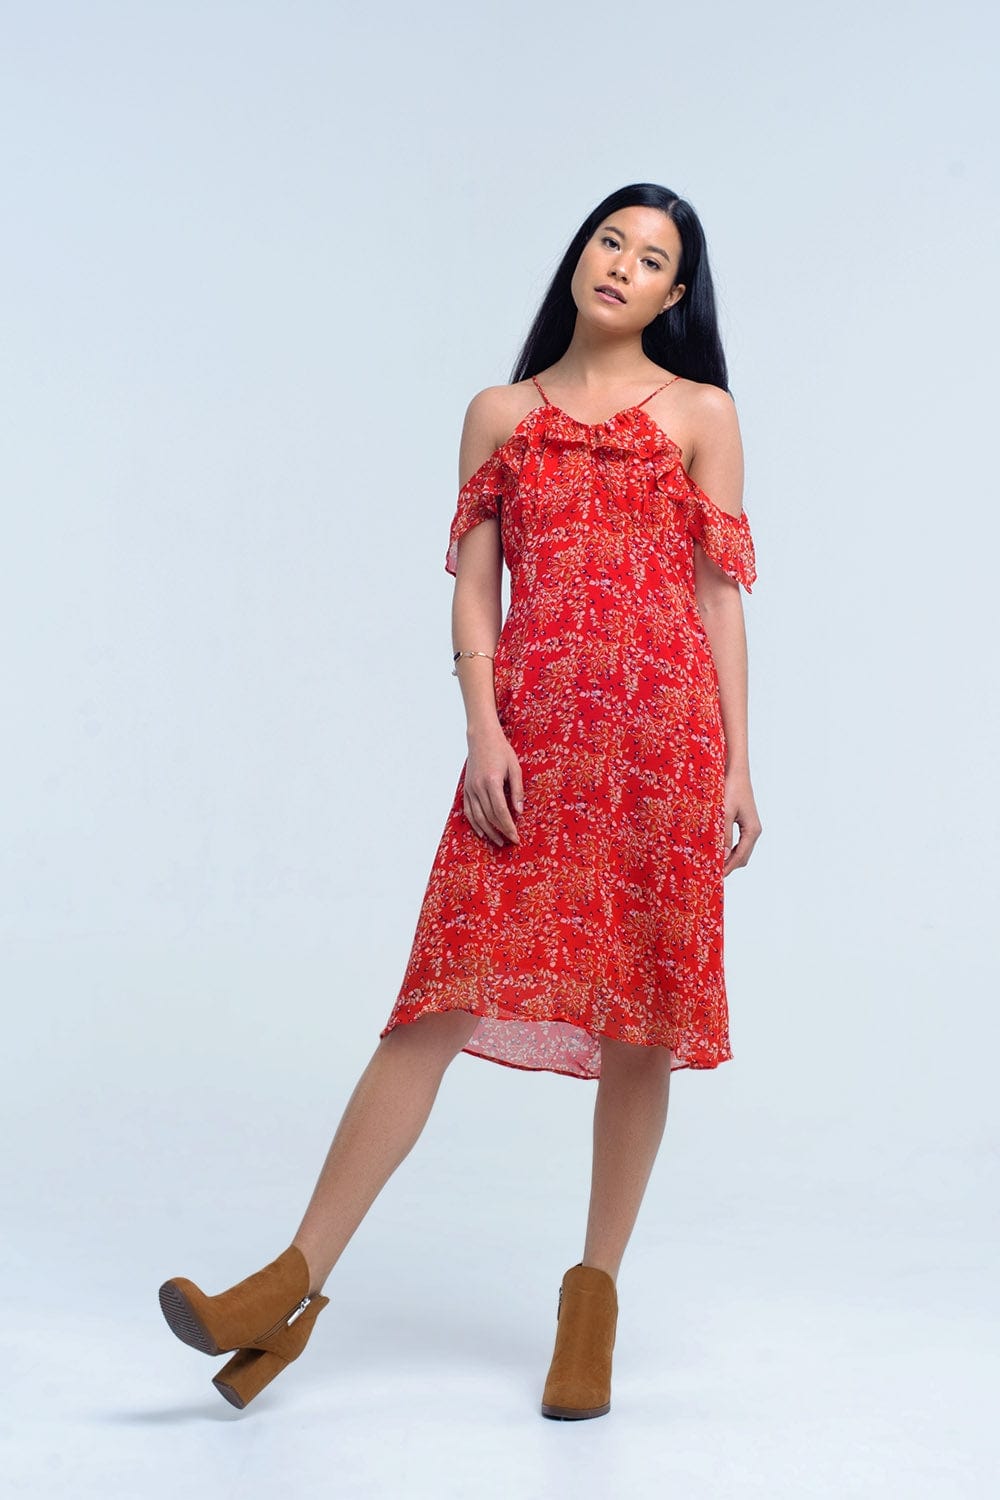 Q2 Women's Dress Red dress with printed flowers and ruffles